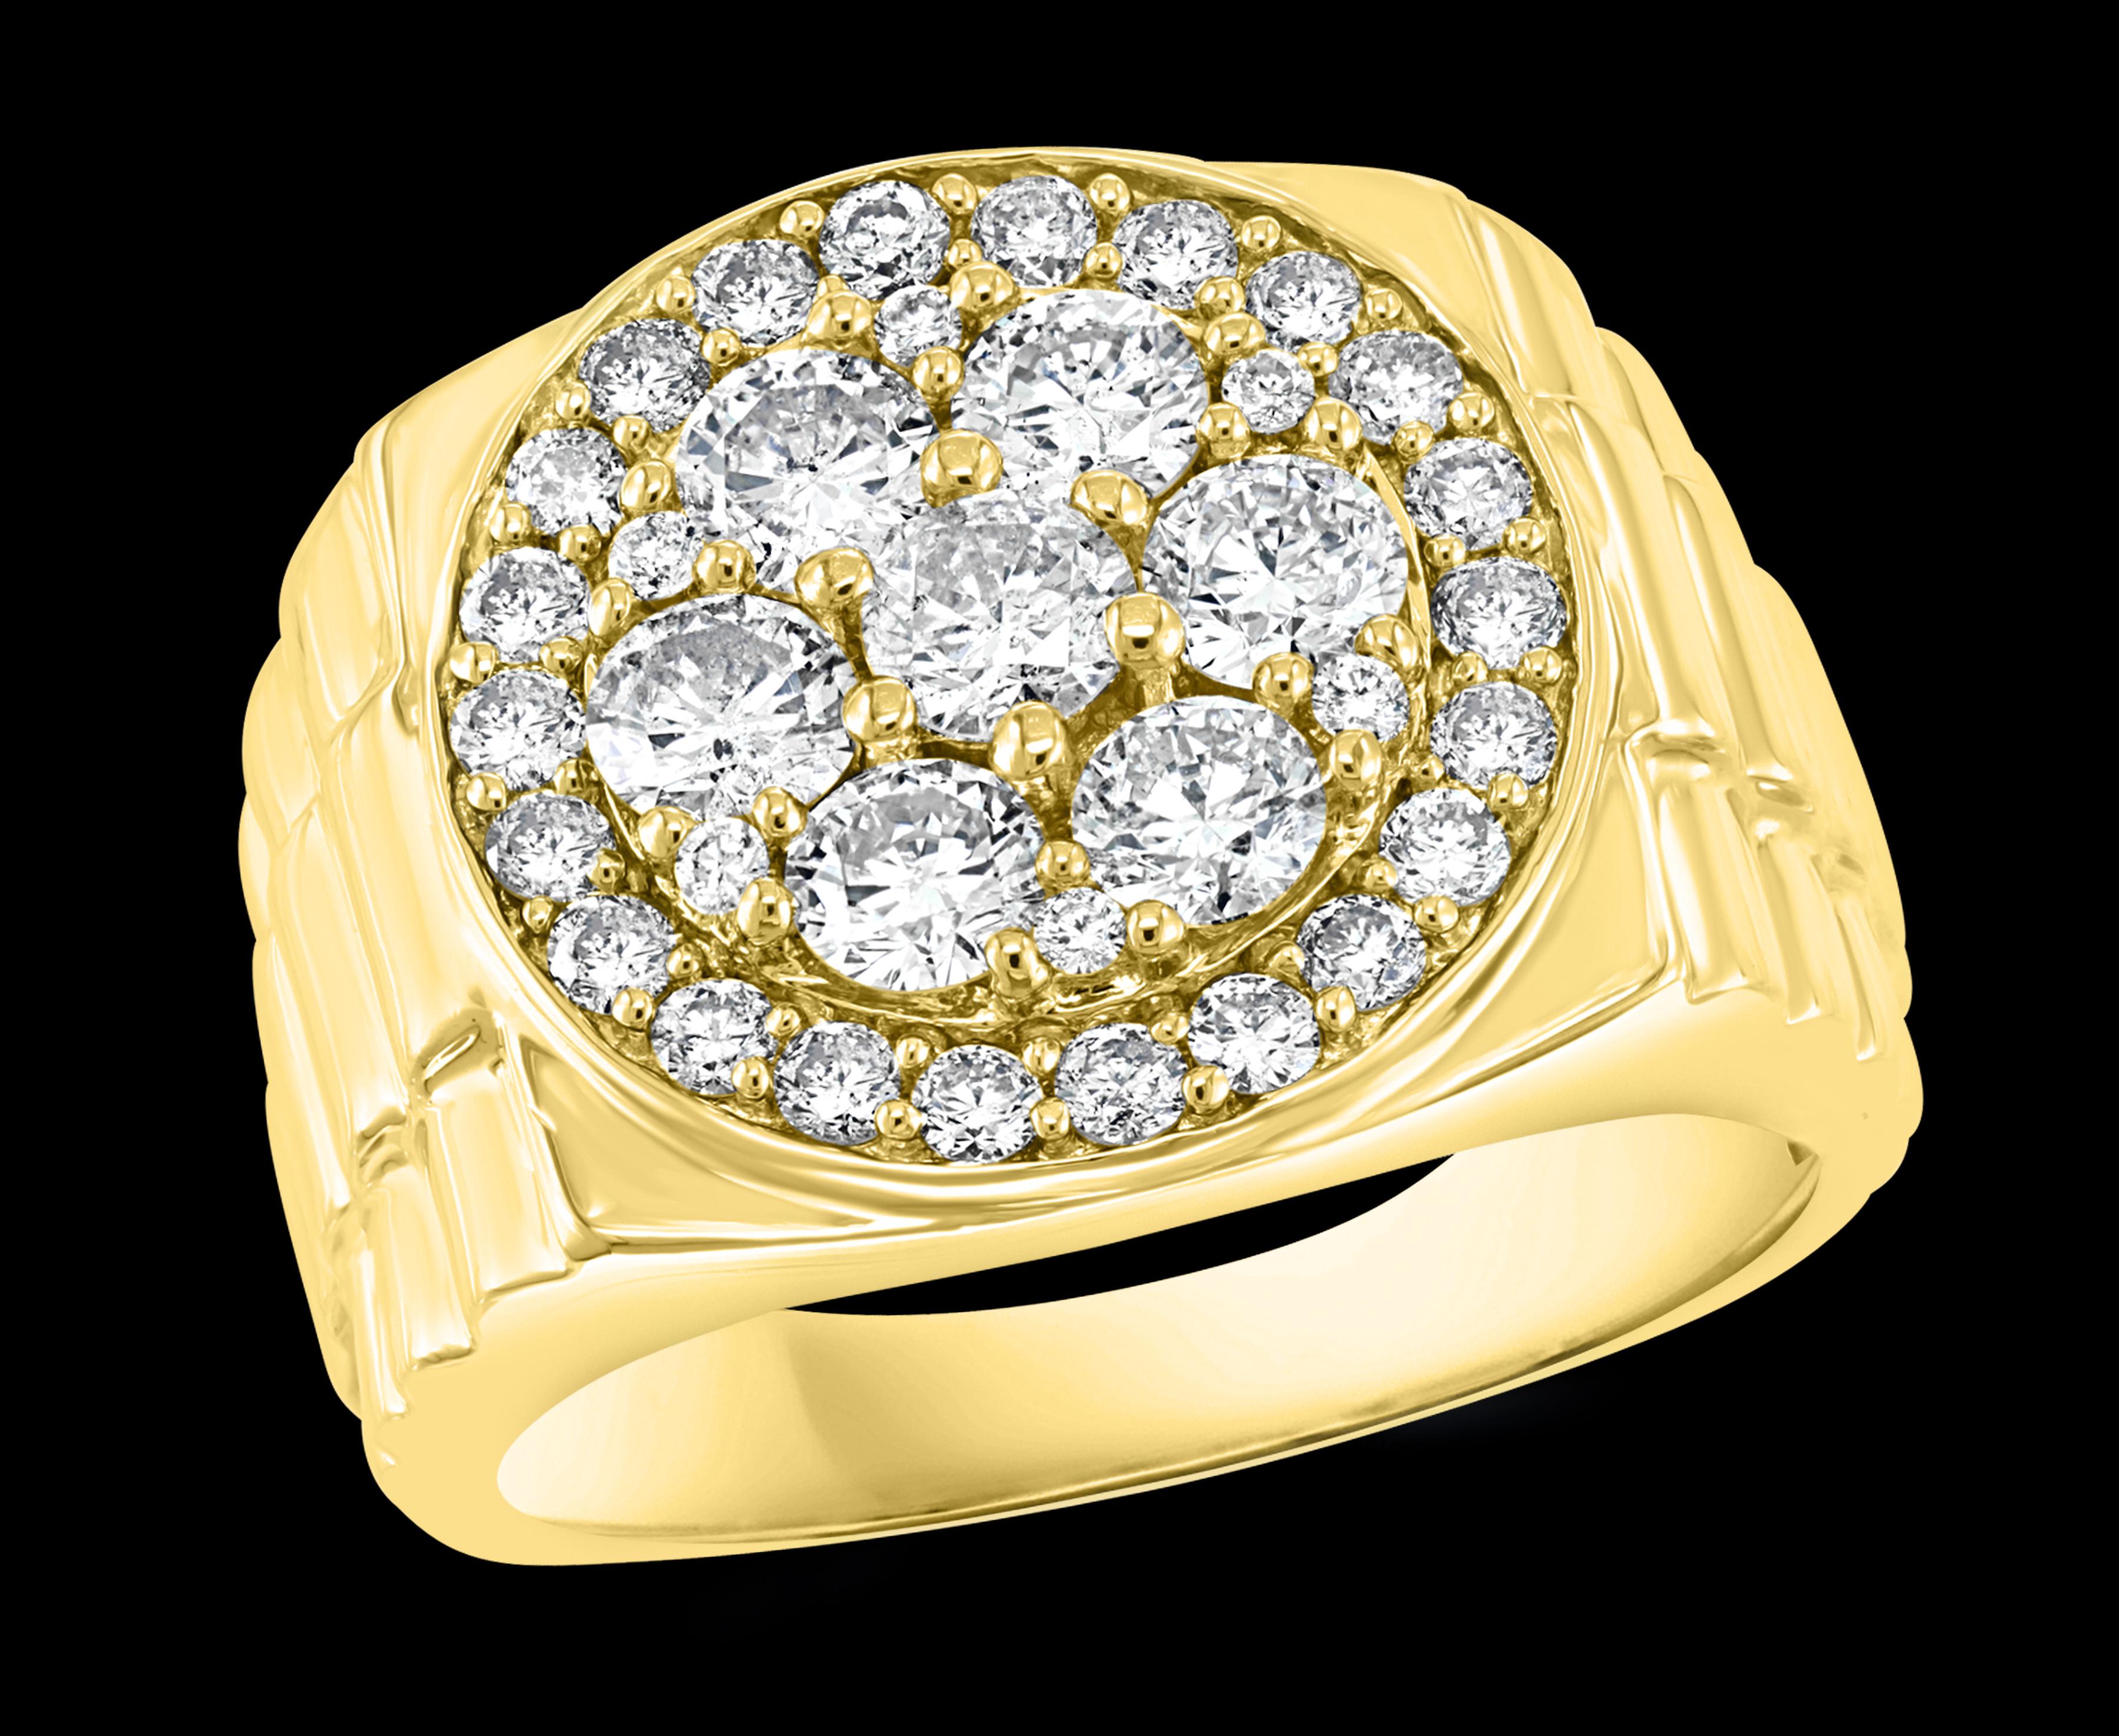 MENS DIAMOND CLUSTER RING BRILLIANT ROUND CUT 2 CARAT 14 KARAT YELLOW GOLD

This is a Nice traditional  diamond  ring  from our premium wedding collection for Men
 7 bigger  Round diamonds  are set to make a inner circle in a form of  Flower   and